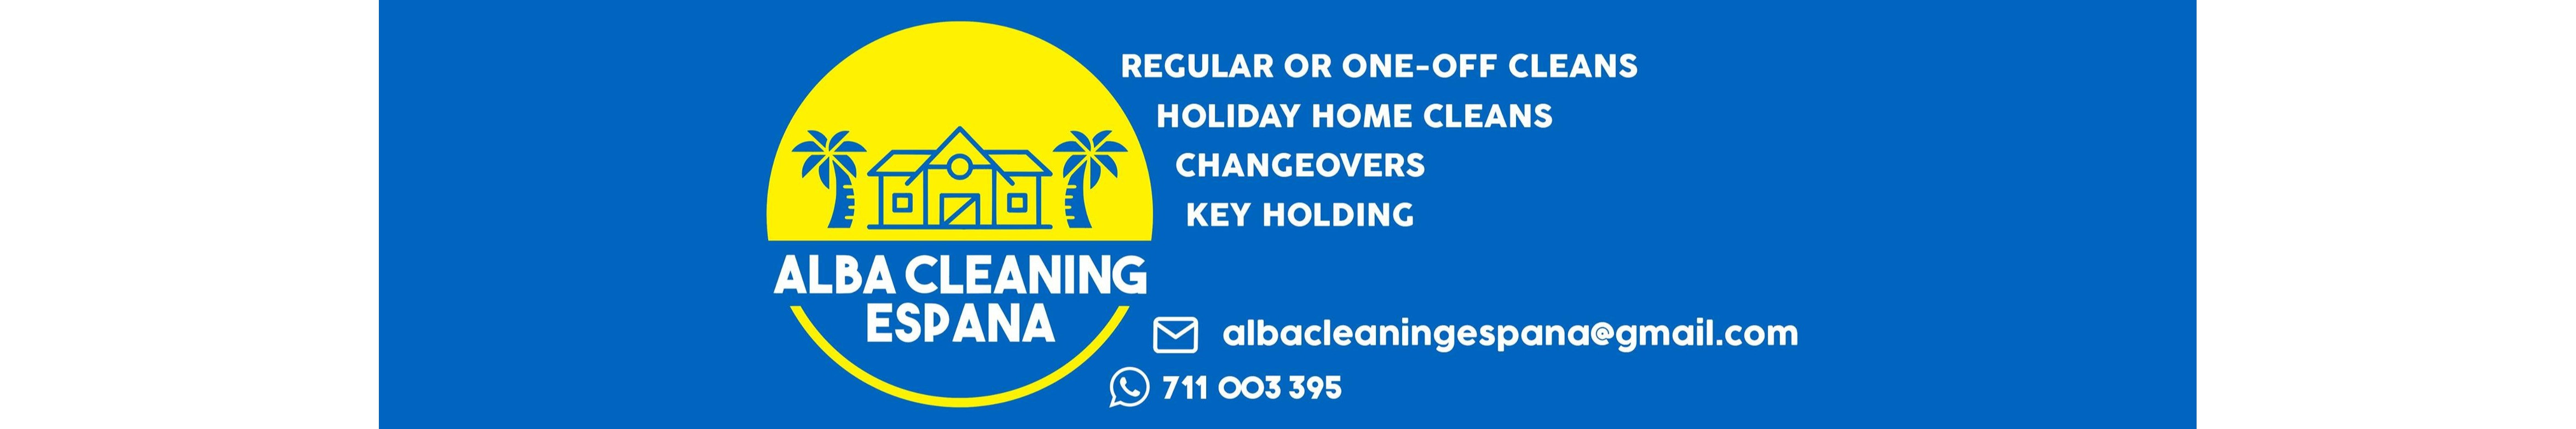 Cleaning services for villas, apartments and holiday homes